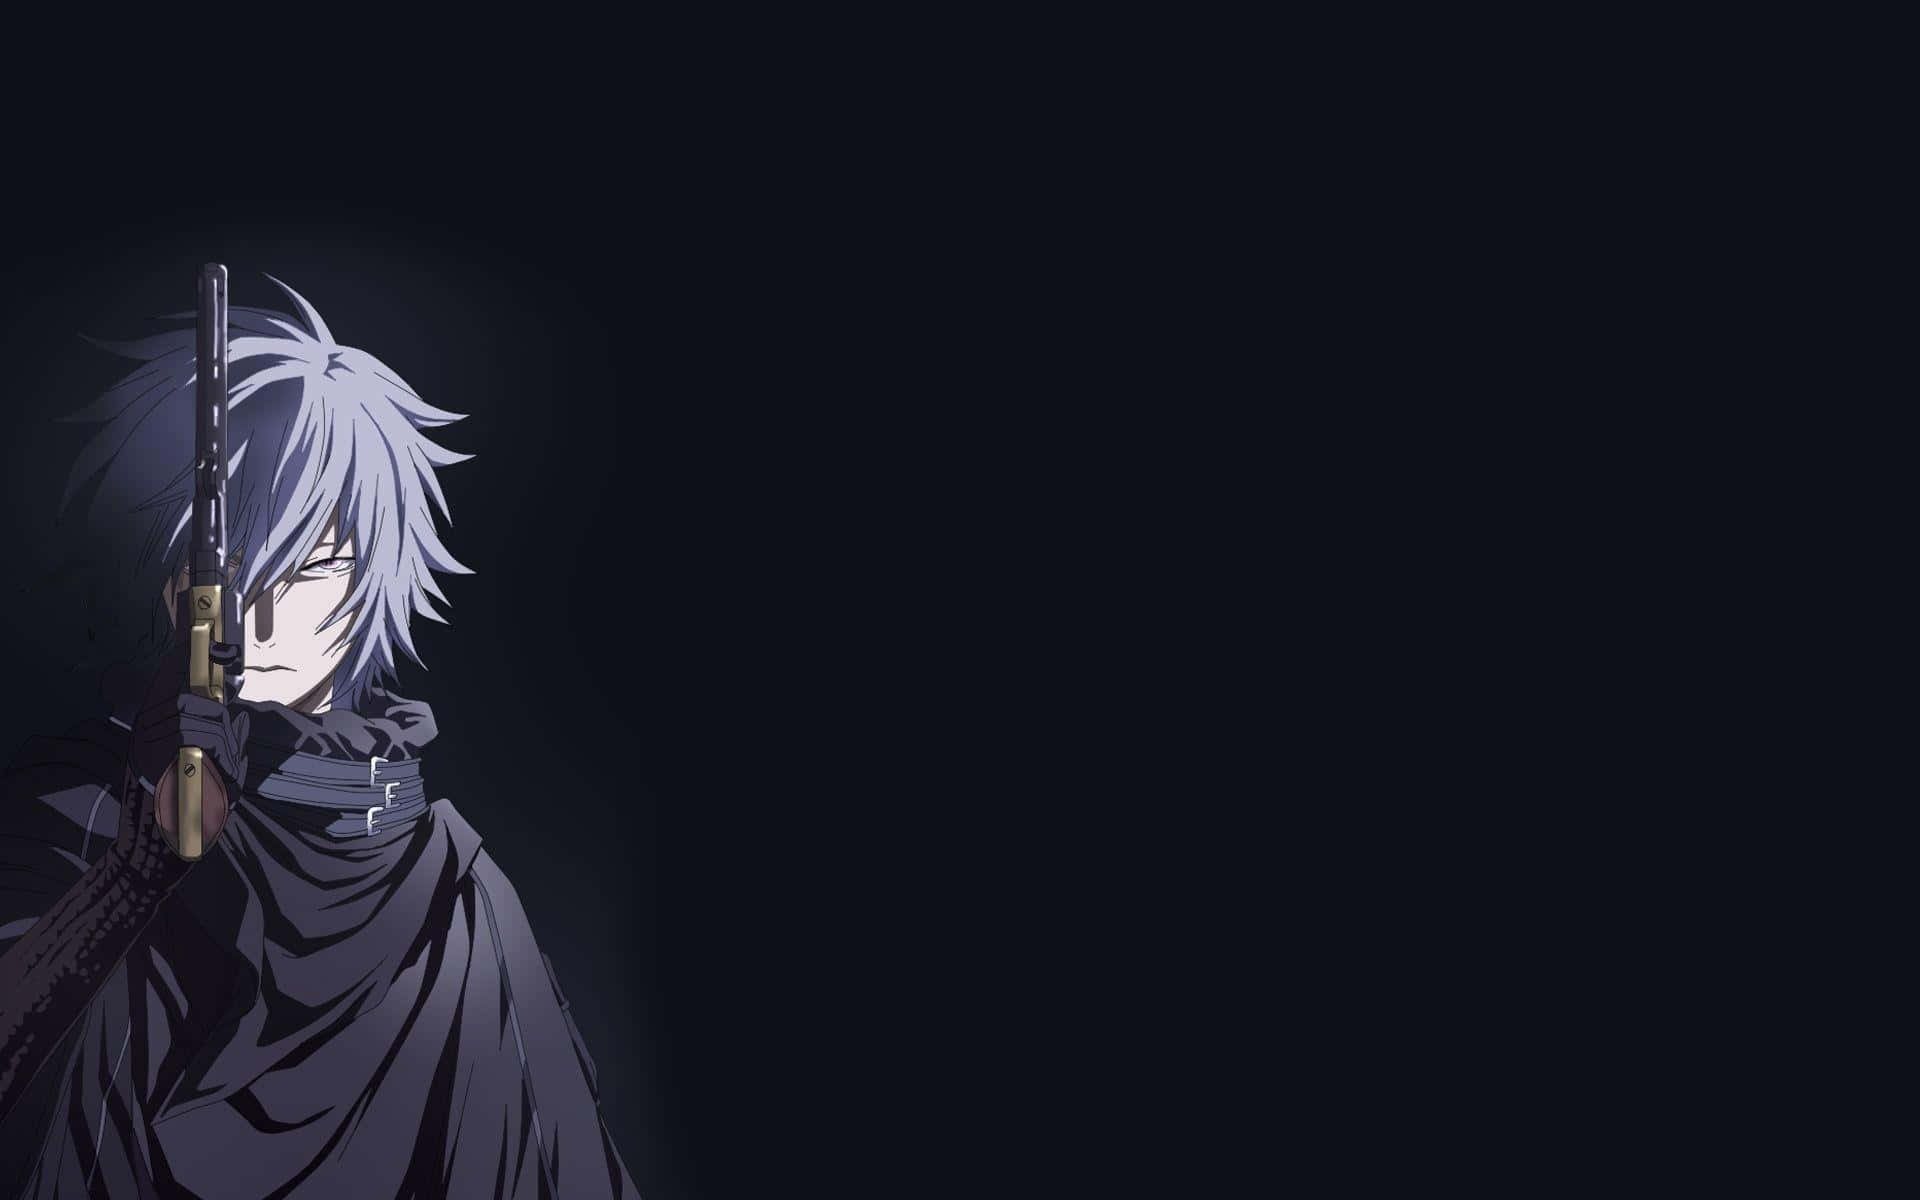 Mysterious and alluring, this cute dark anime character will send chills down your spine Wallpaper